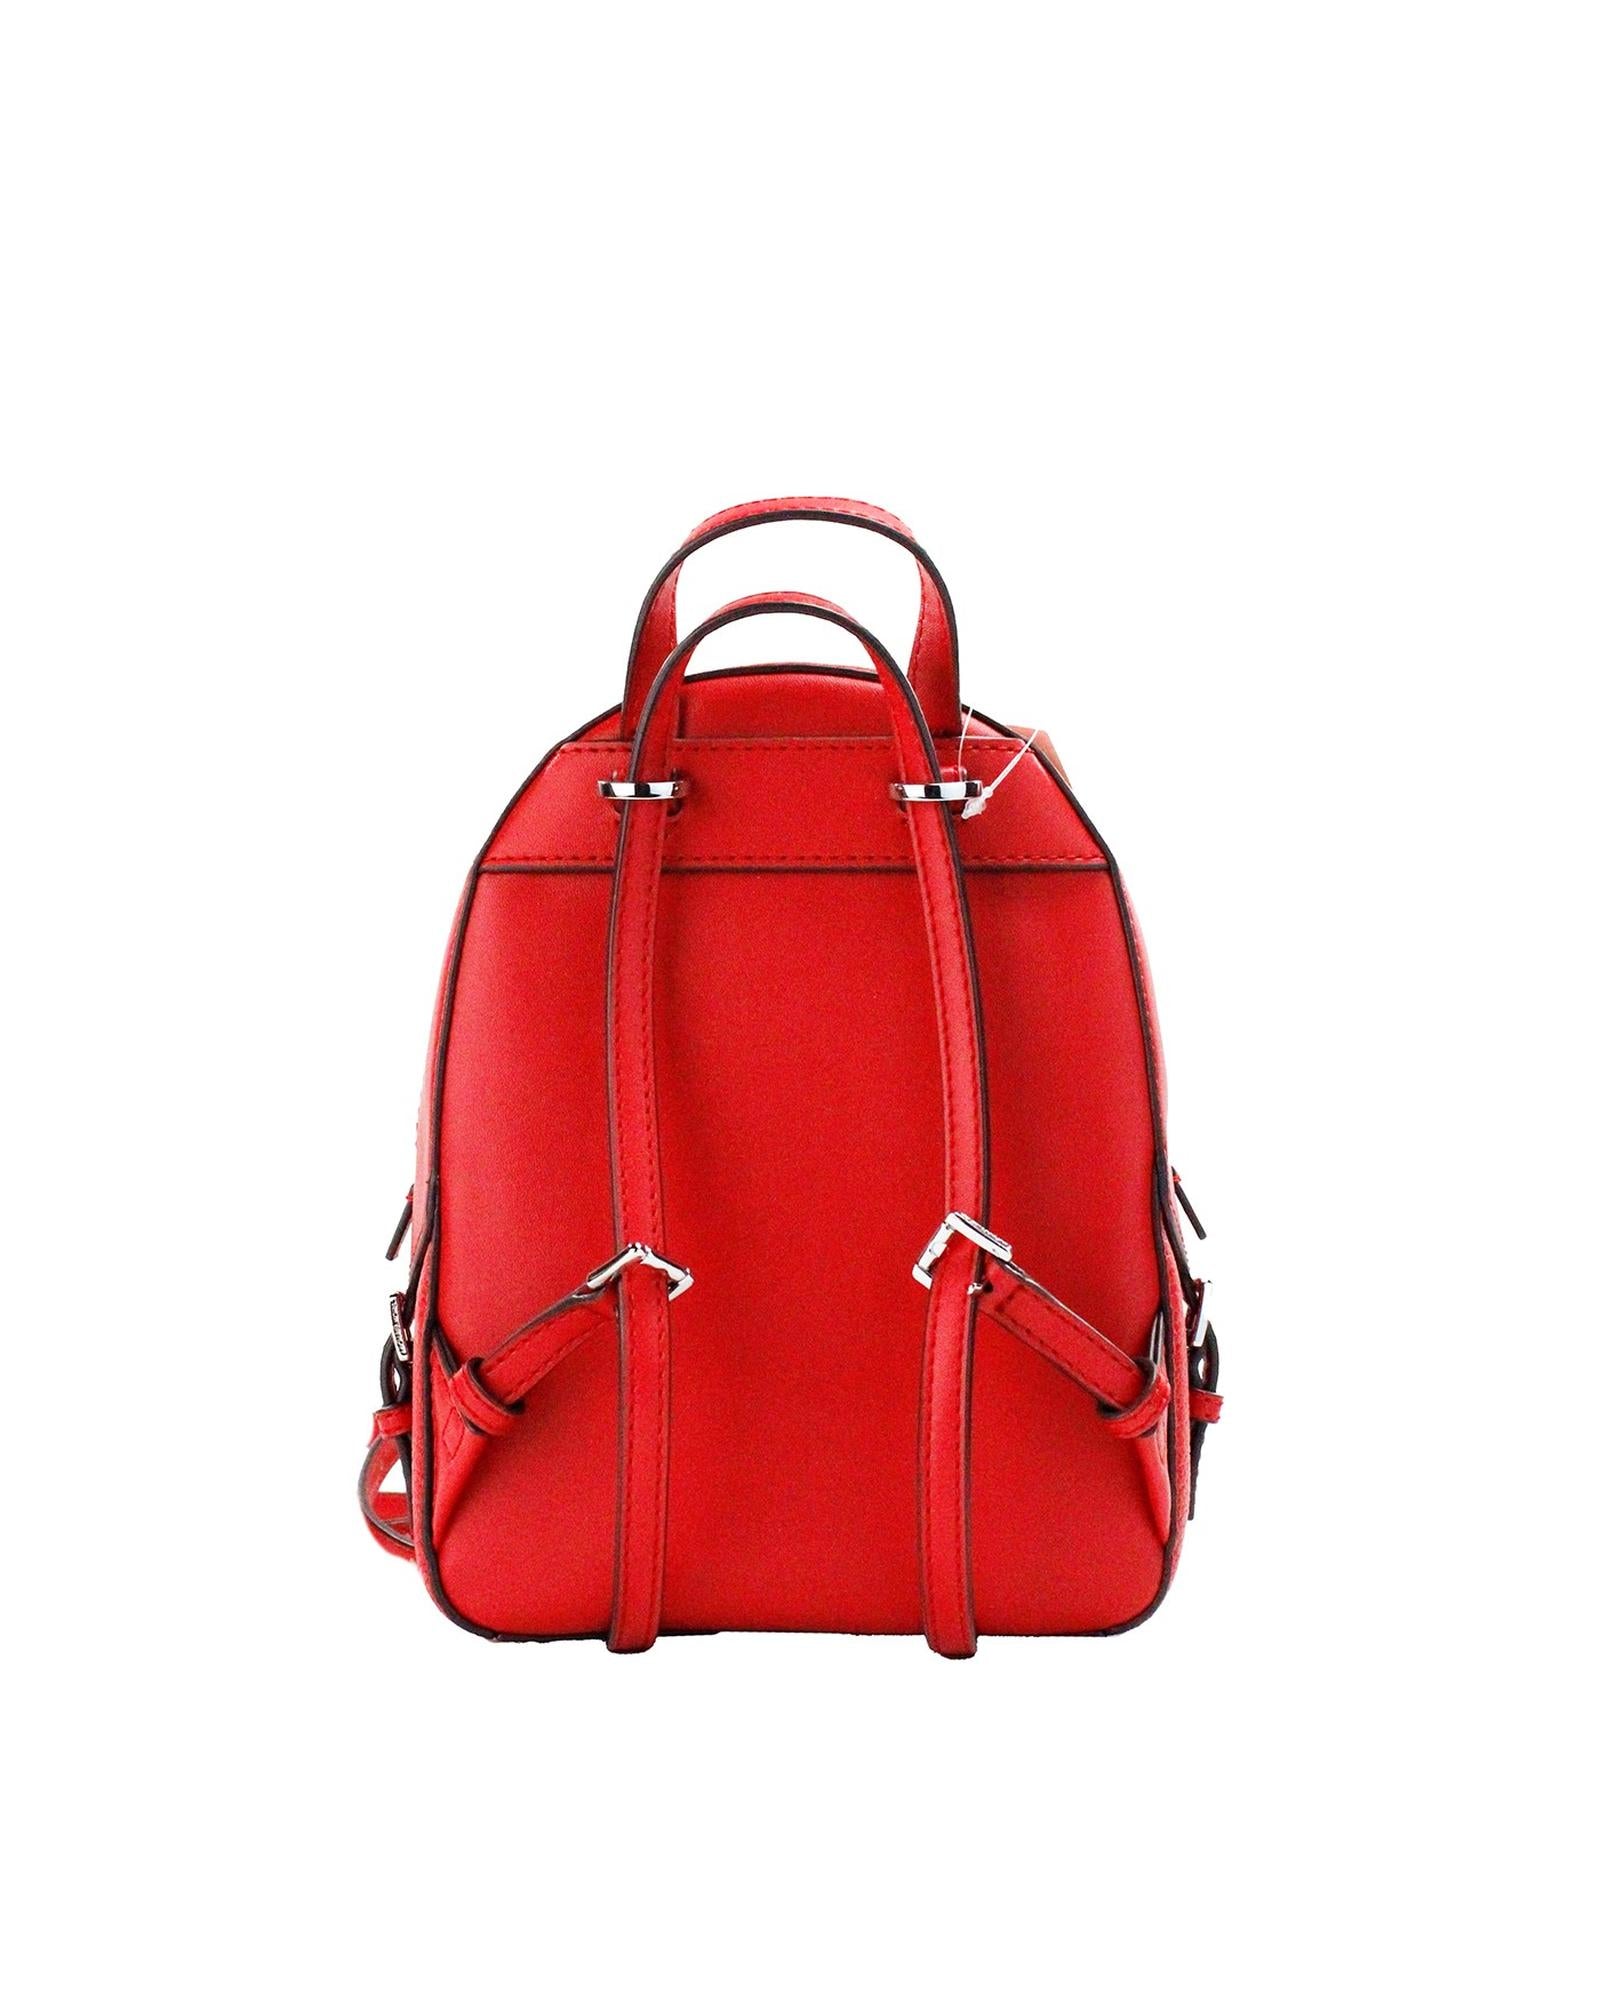 Women's Jaycee Mini XS Bright Red Pebbled Leather Zip Pocket Backpack Bag - One Size